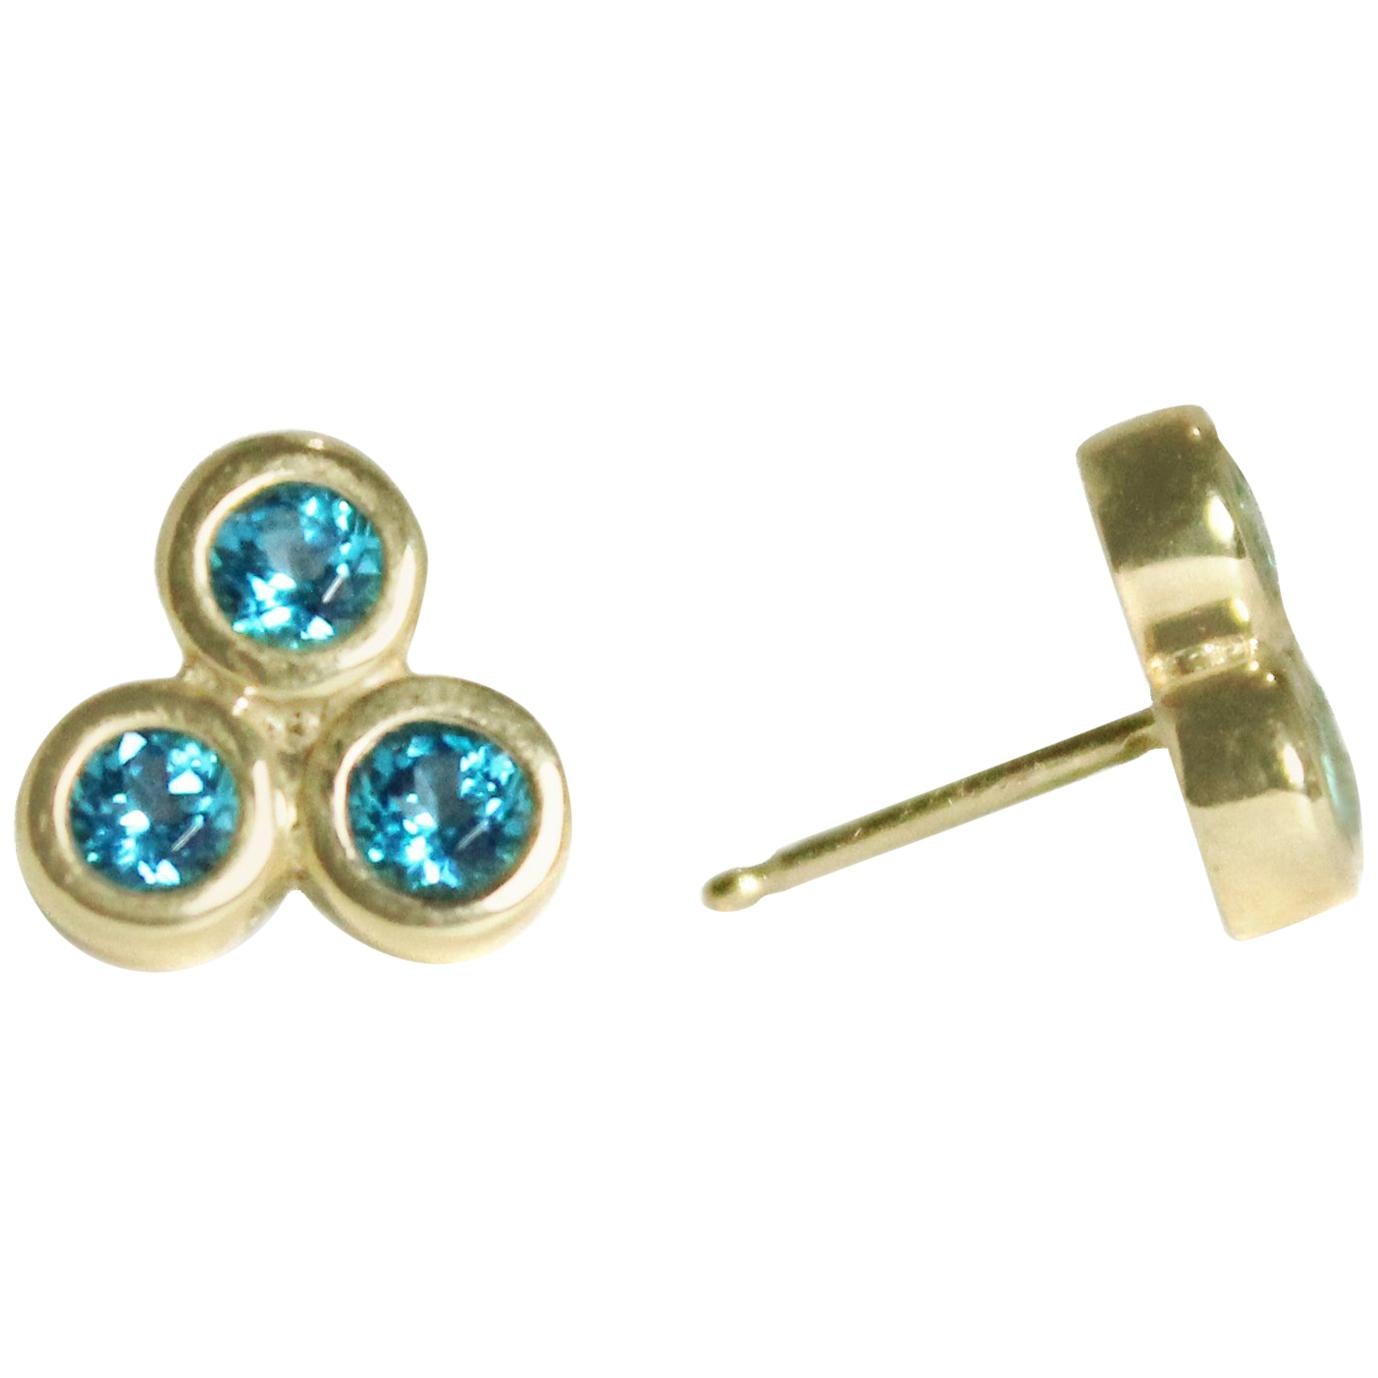 Emily Kuvin Triple Paraiba Topaz and Gold Earrings